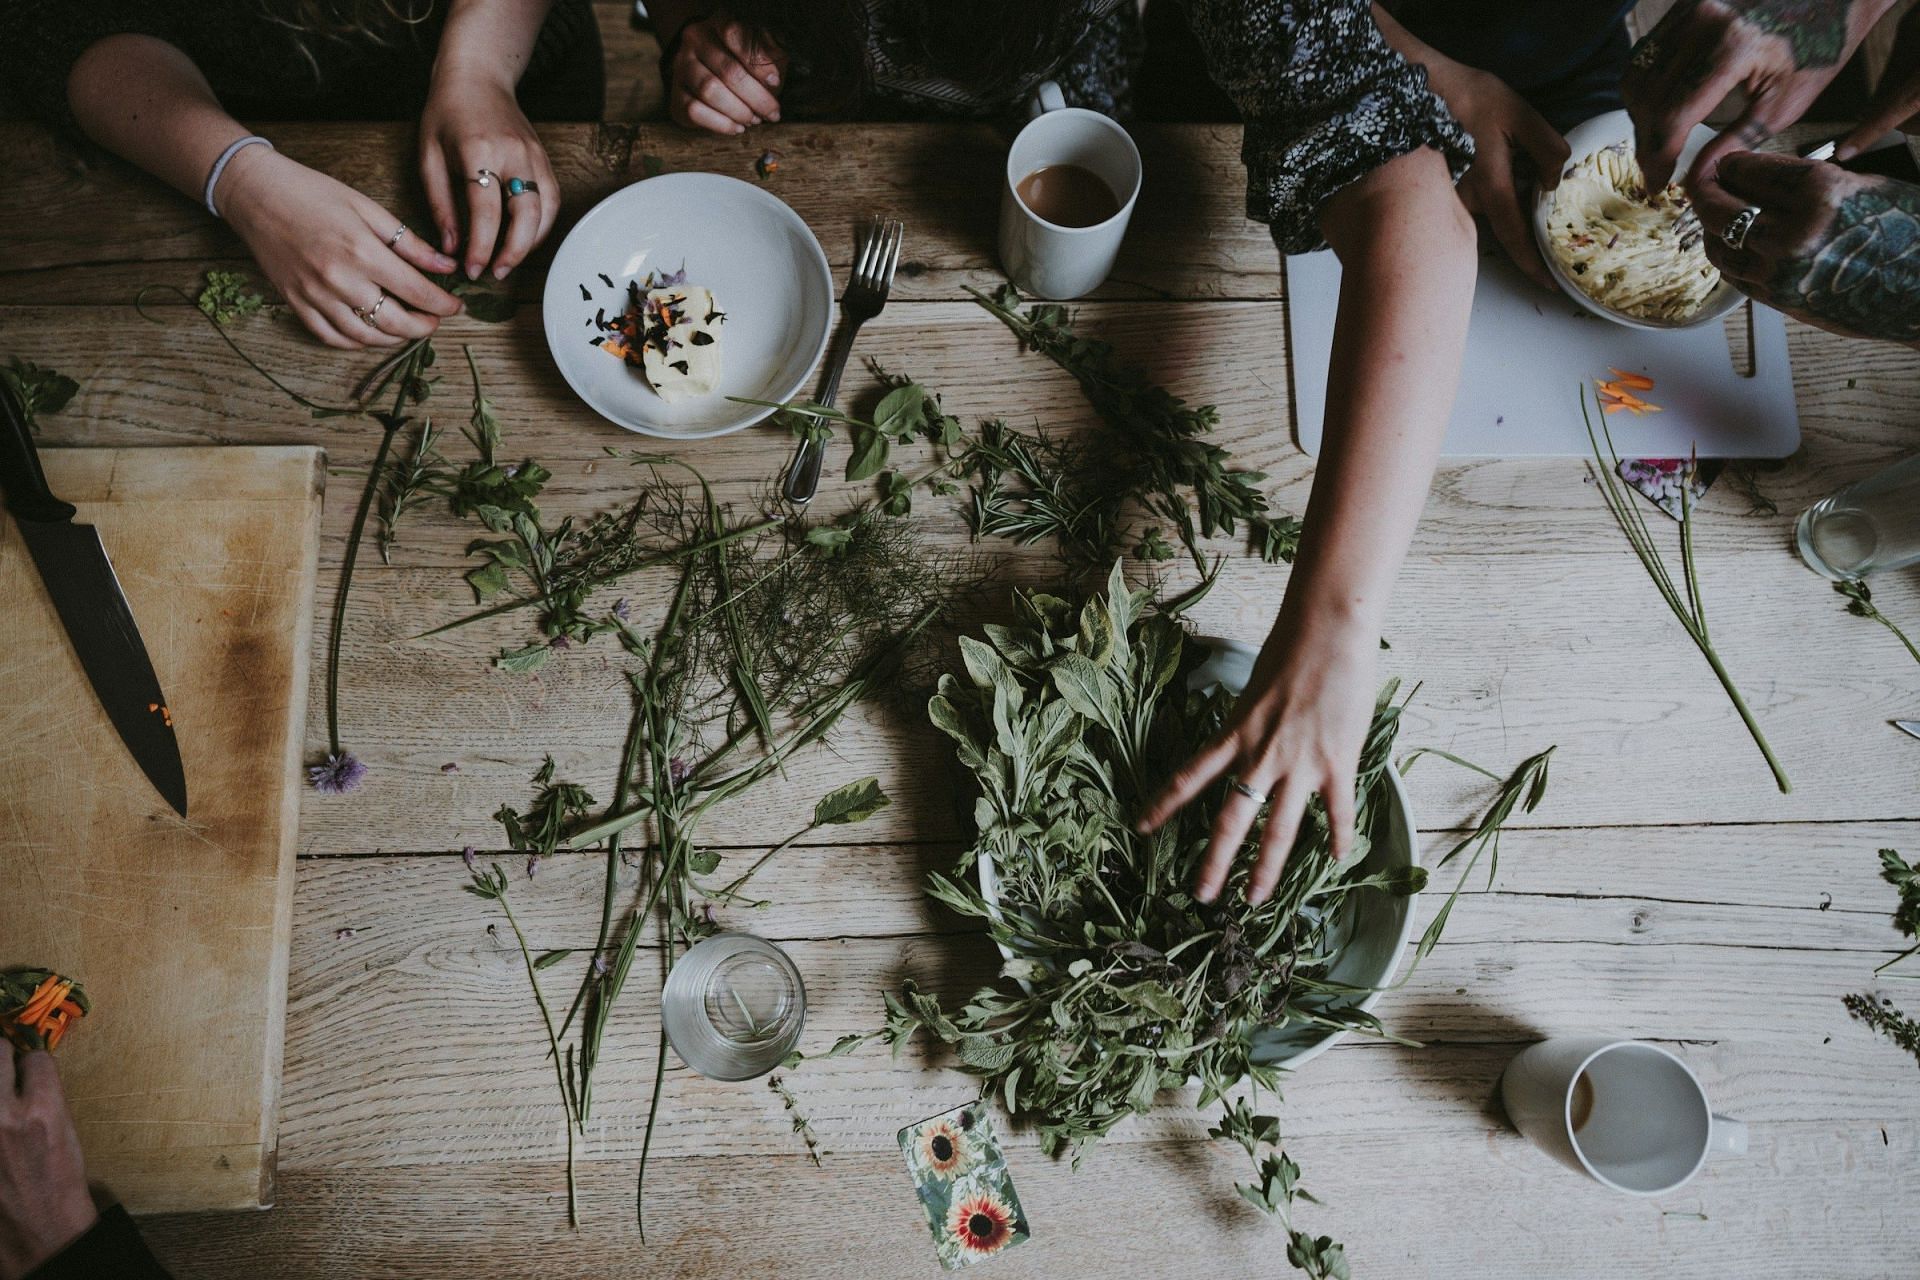 Now that we know what is a sage herb, let us see its uses (Image by Annie Spratt/Unsplash)